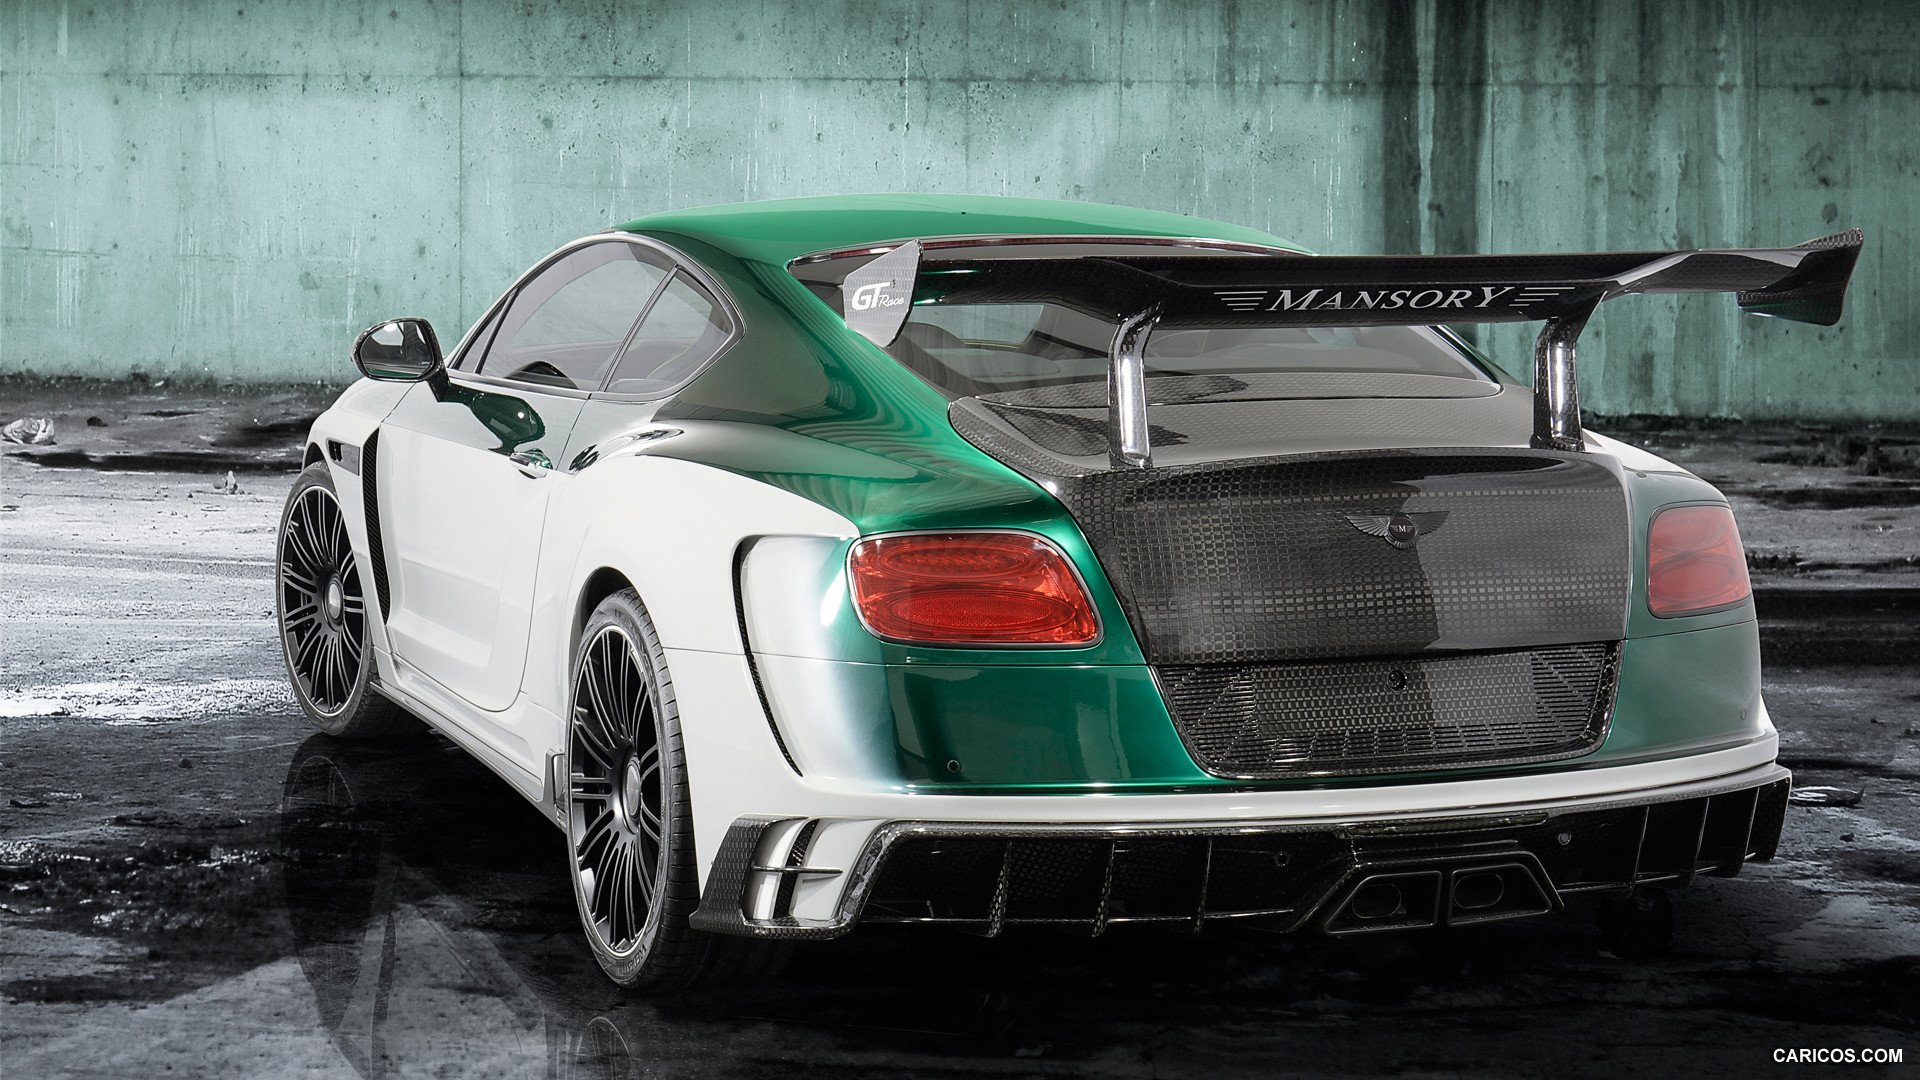 2015 Mansory GT Race based on Bentley Continental GT  - Rear, #2 of 7